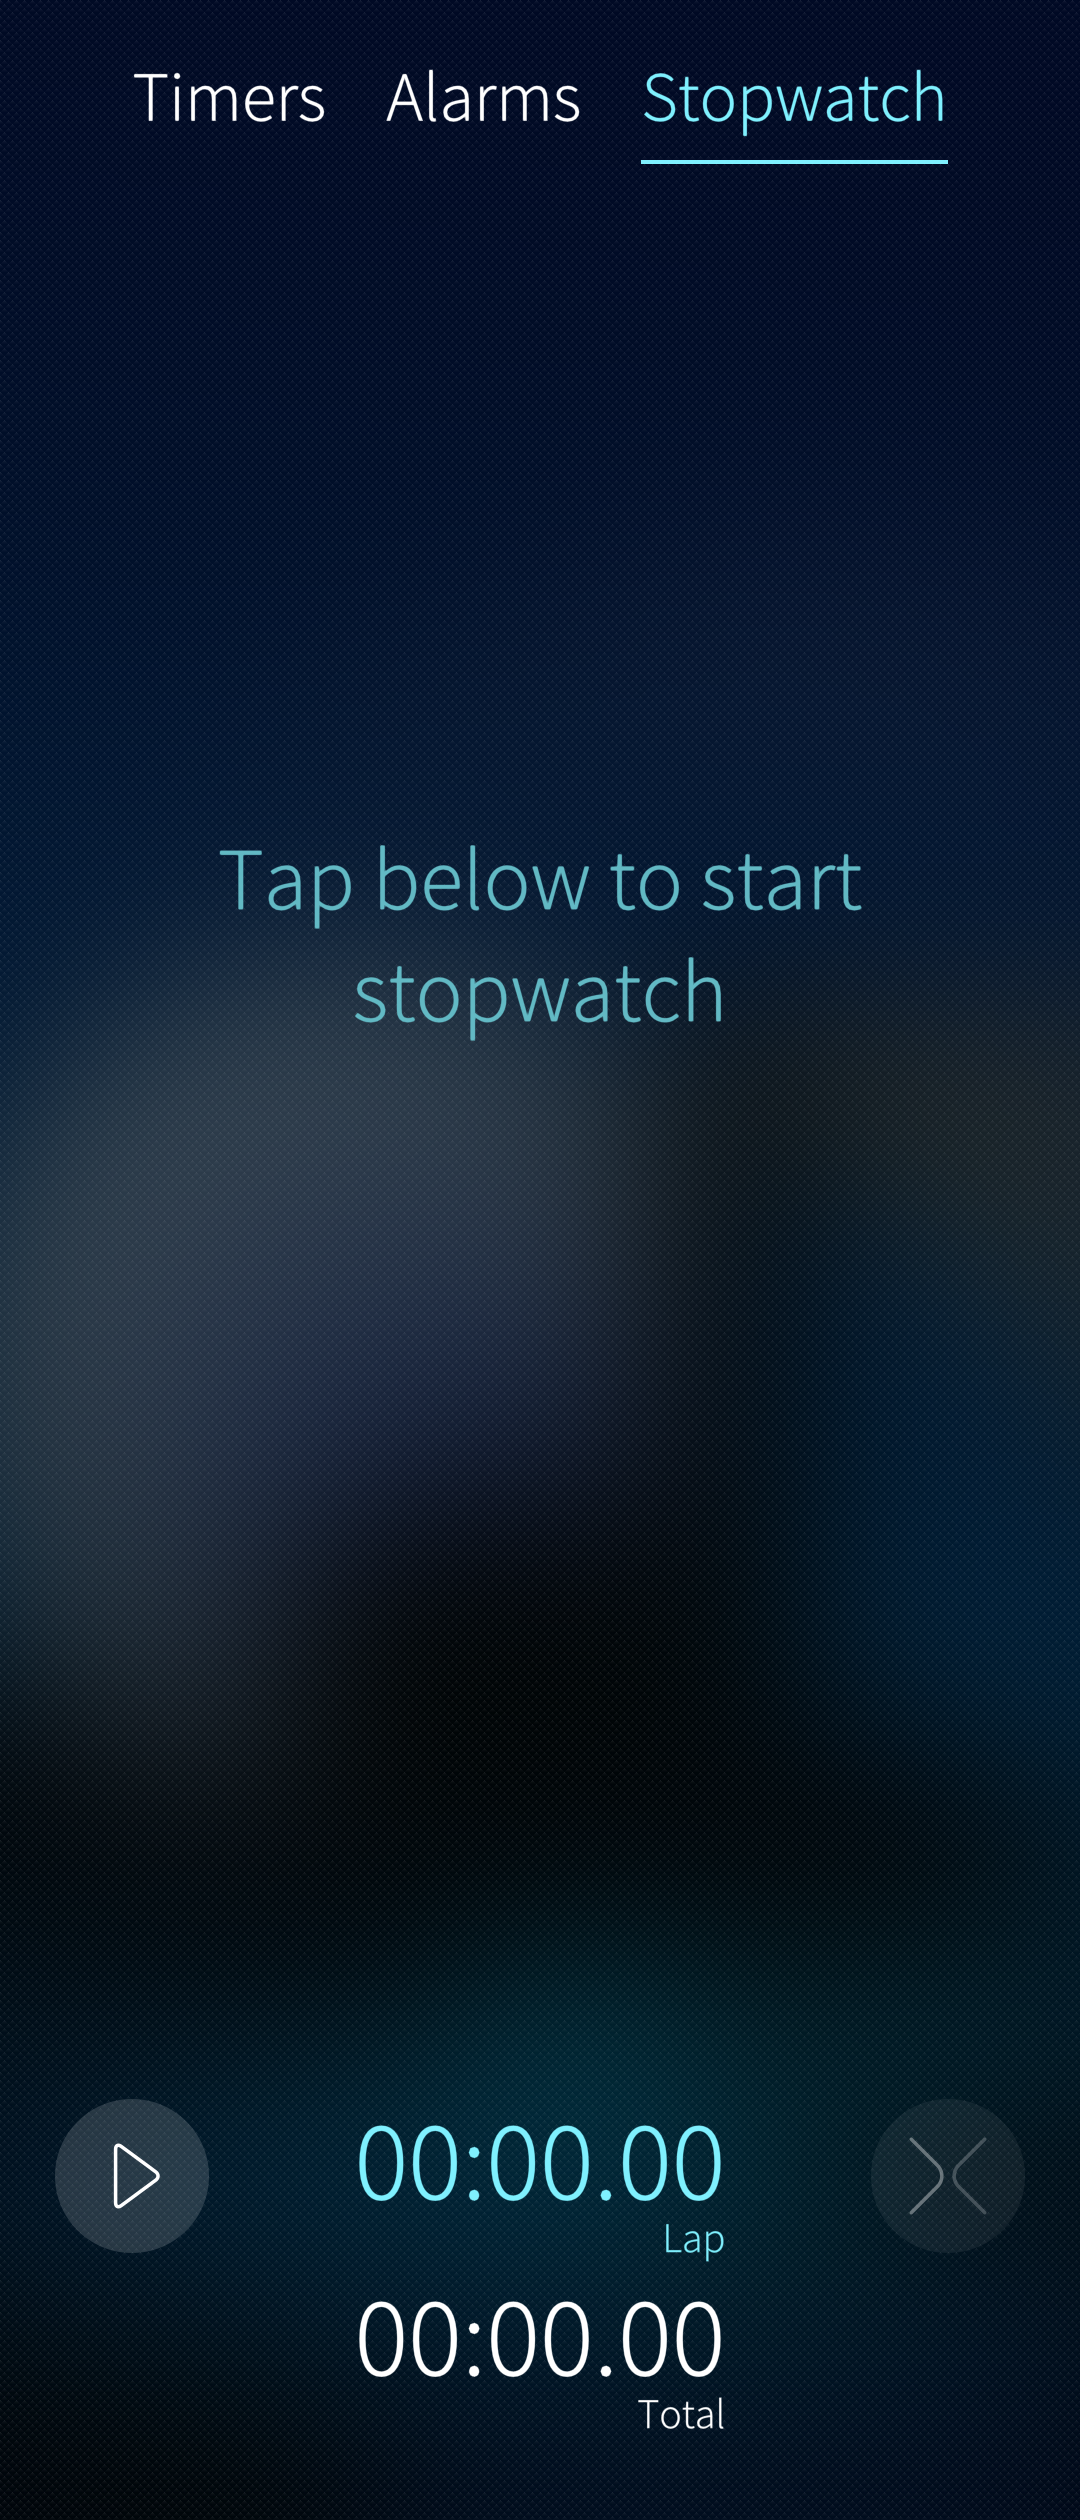 Home view of stopwatch